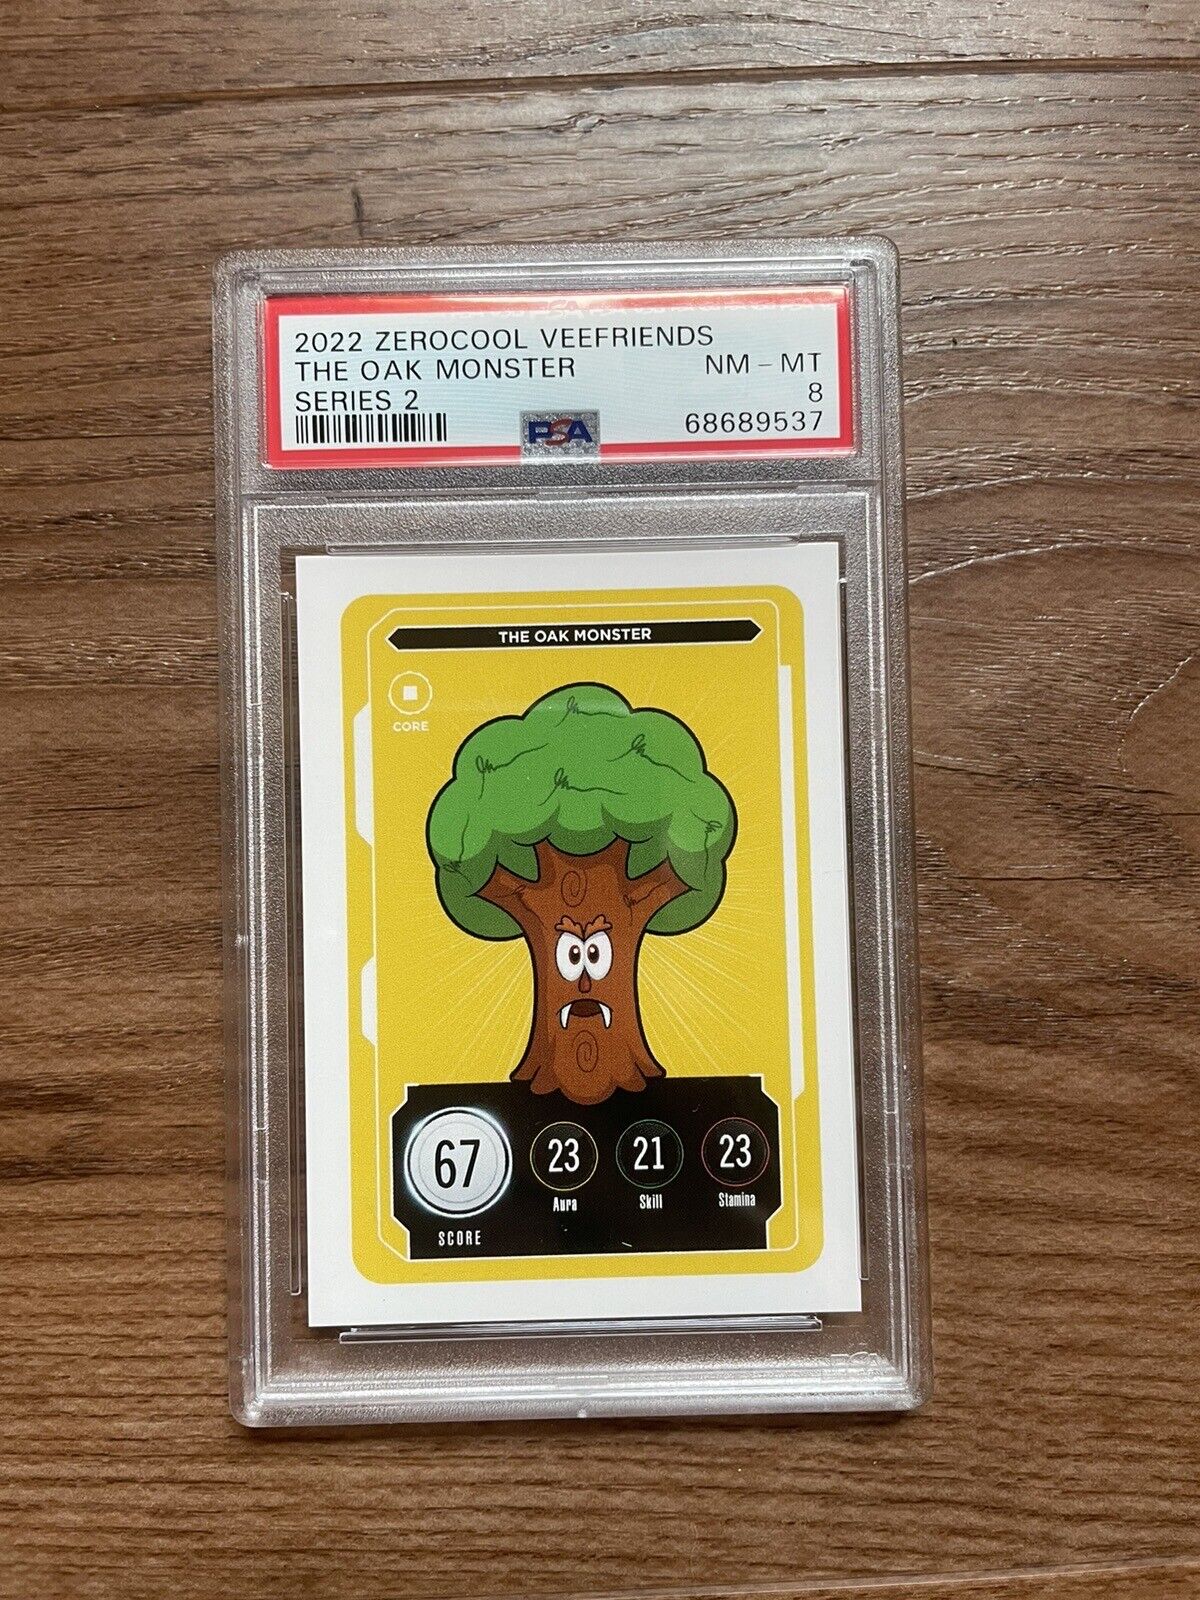 Veefriends Compete And Collect The Oak Monster PSA 8